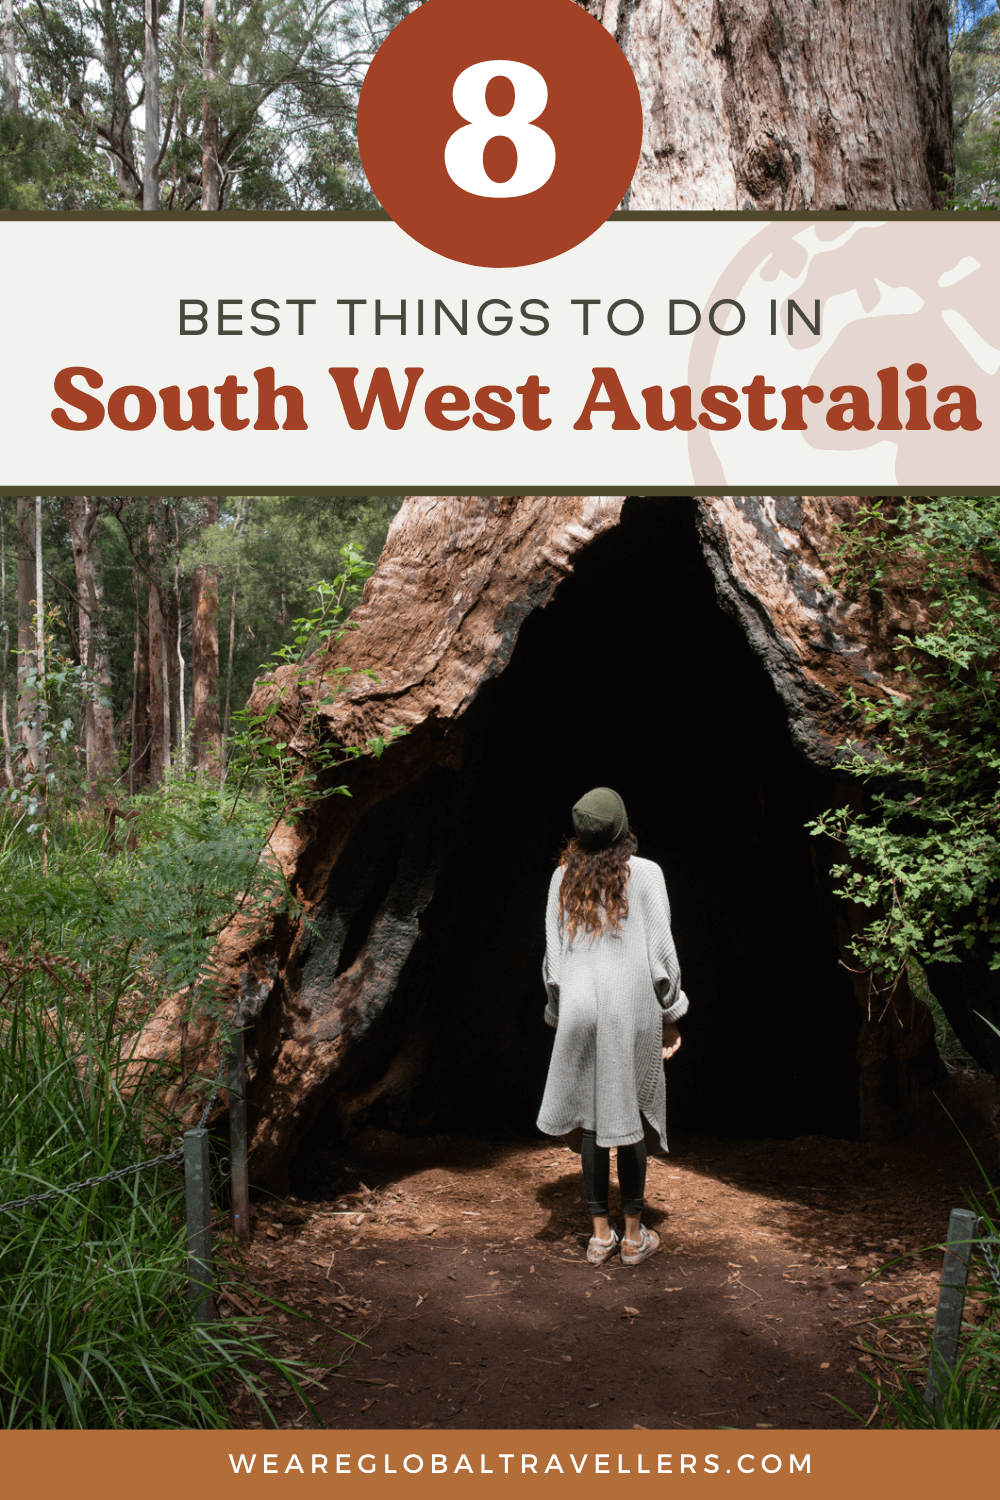 The best things to do in Margaret River and the South West, Australia